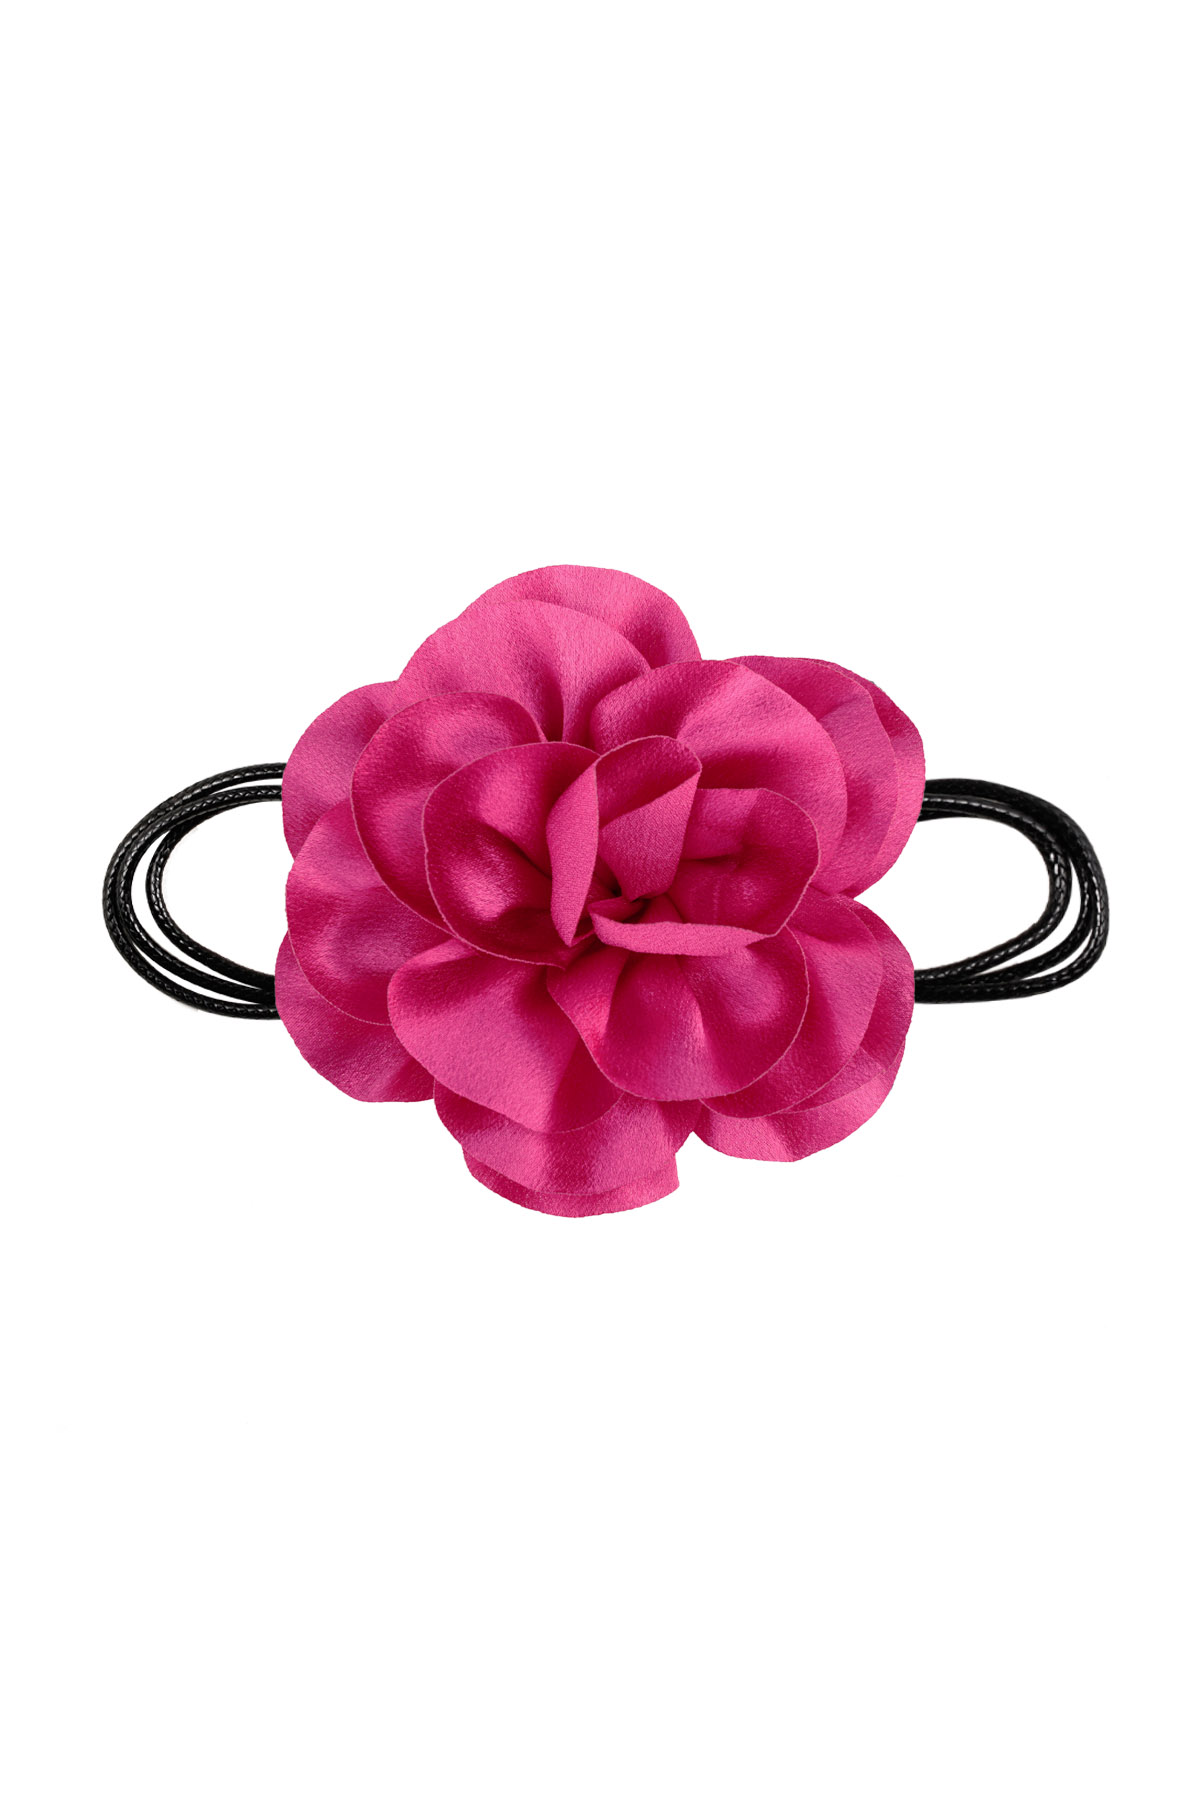 Necklace rope shiny flower - bright pink